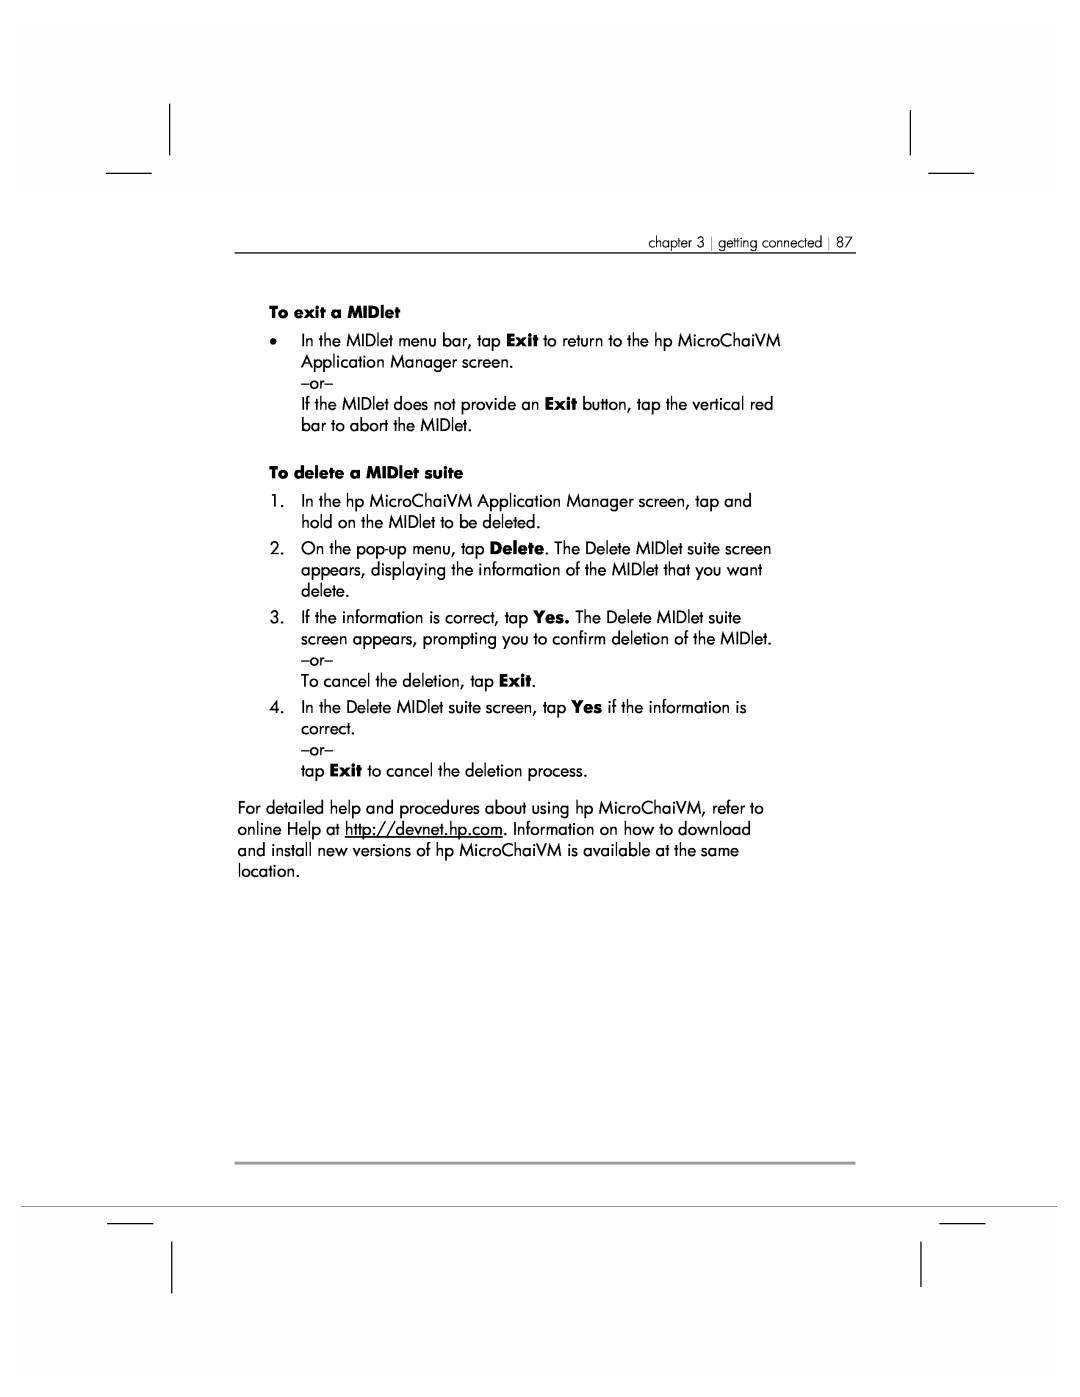 HP 920 manual To exit a MIDlet, To delete a MIDlet suite 